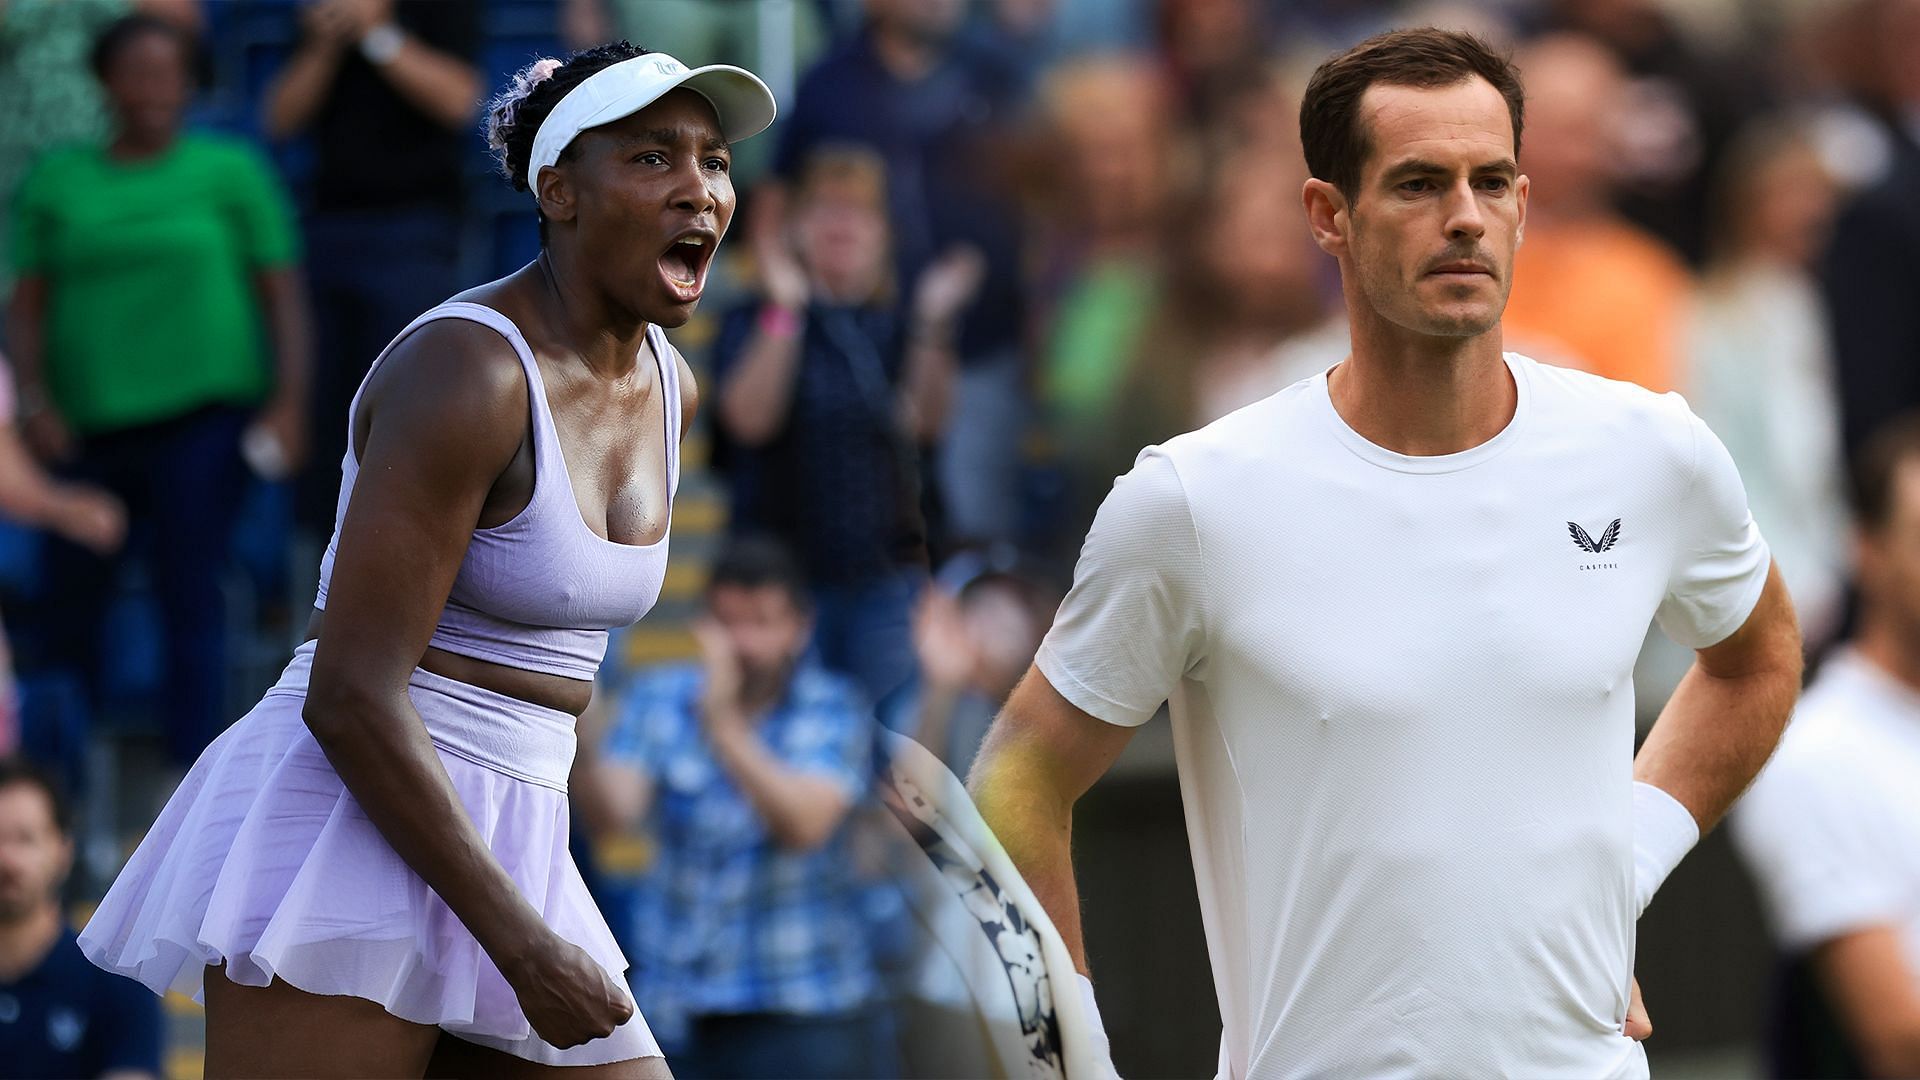 Is it right to rank Venus Williams' career achievements below Andy Murray's? Everything to know about the new list that has stirred up controversy